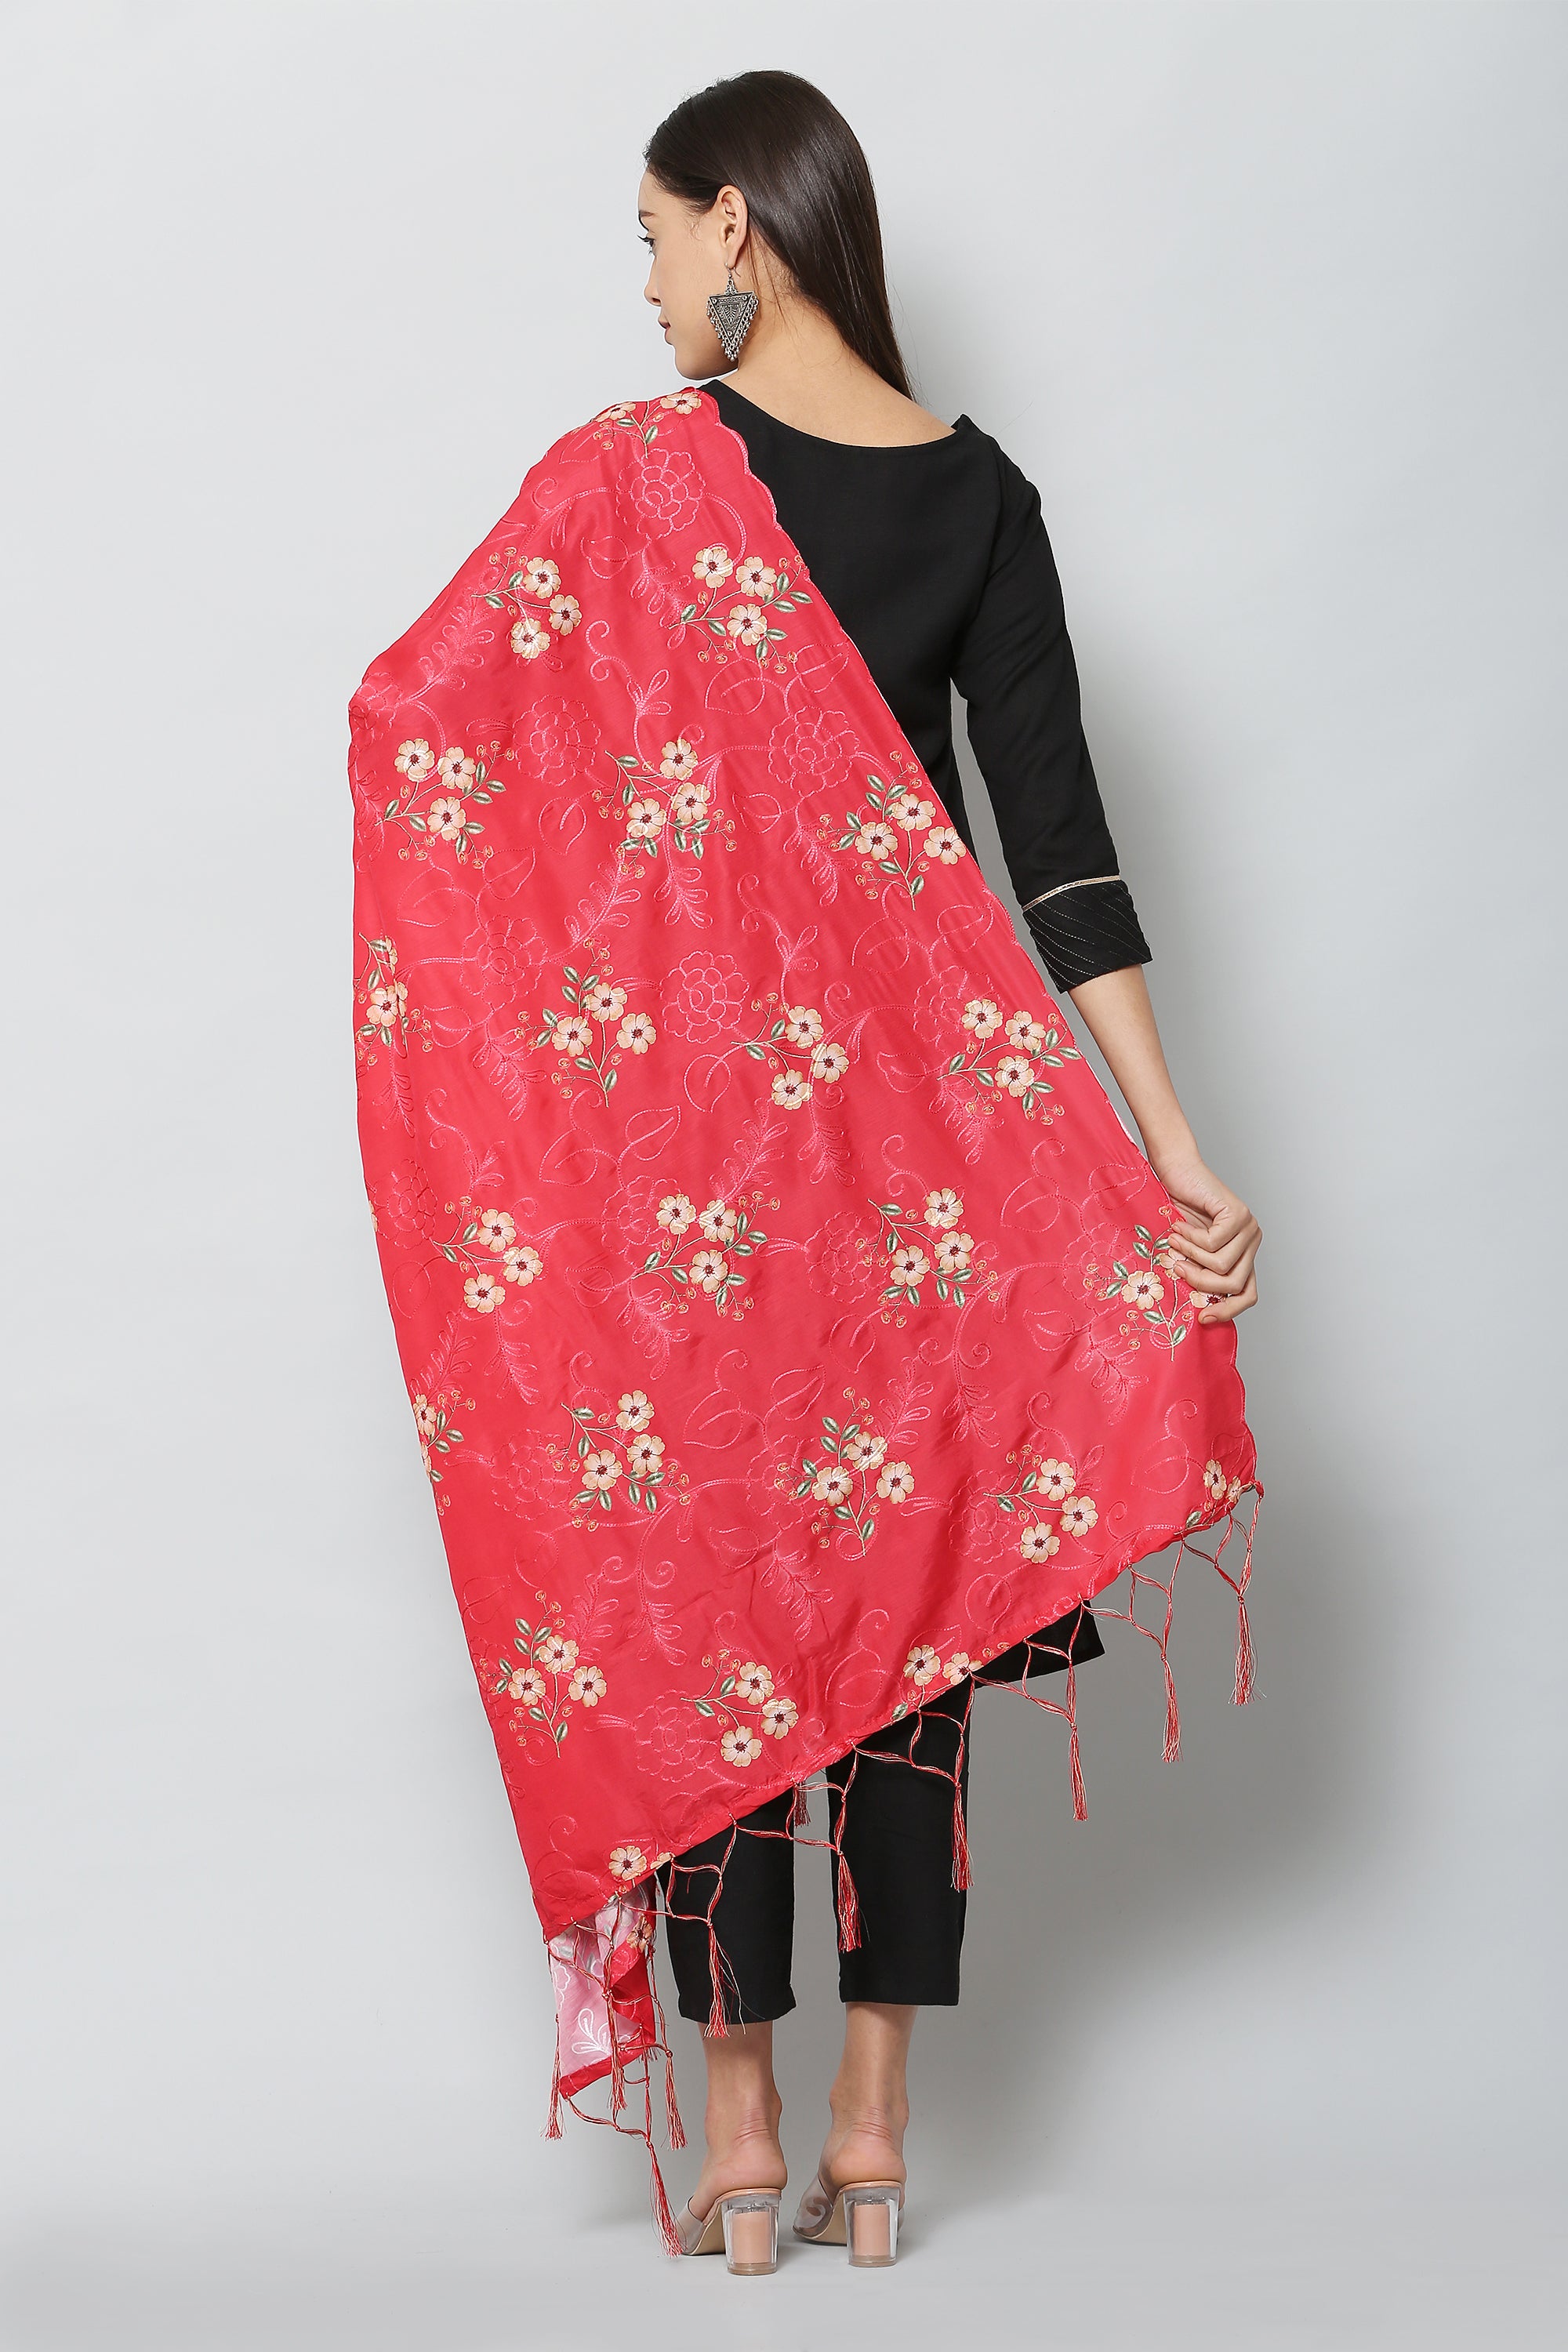 Women's Red Color Art Muslin Embroidery and Digital Printed Dupatta - VAABA